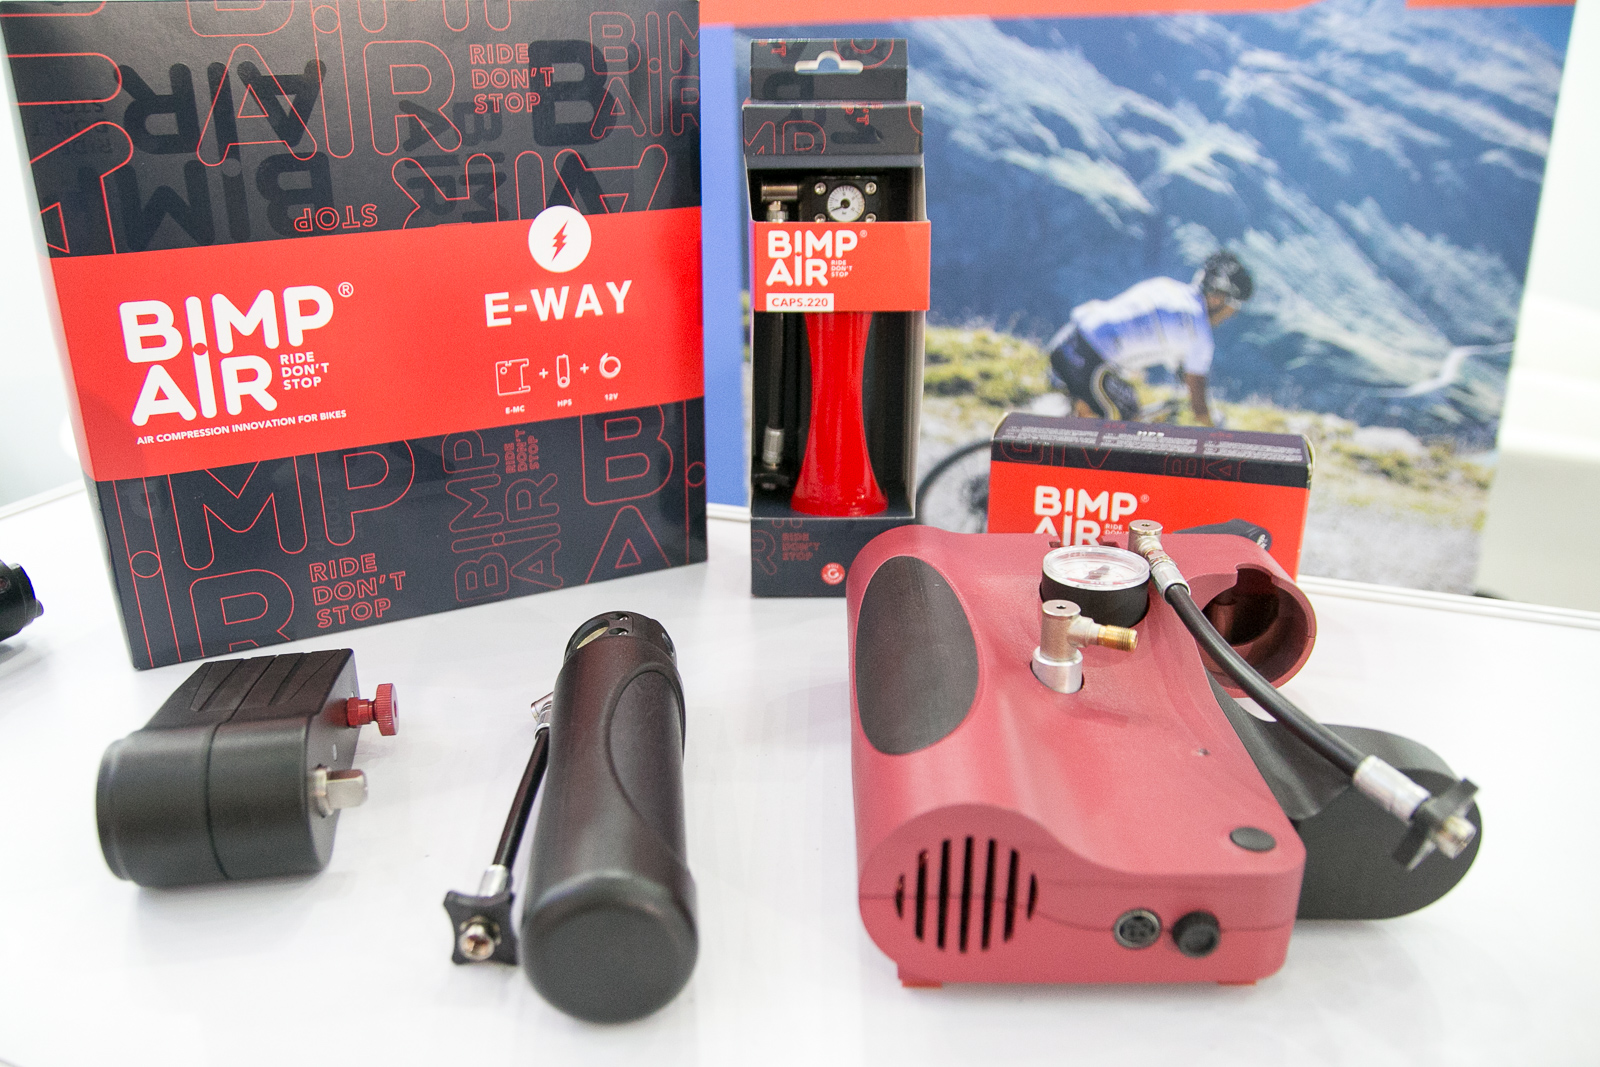 TPE16: Bimp Air turns your bike into a portable compressor to fill tires on the fly